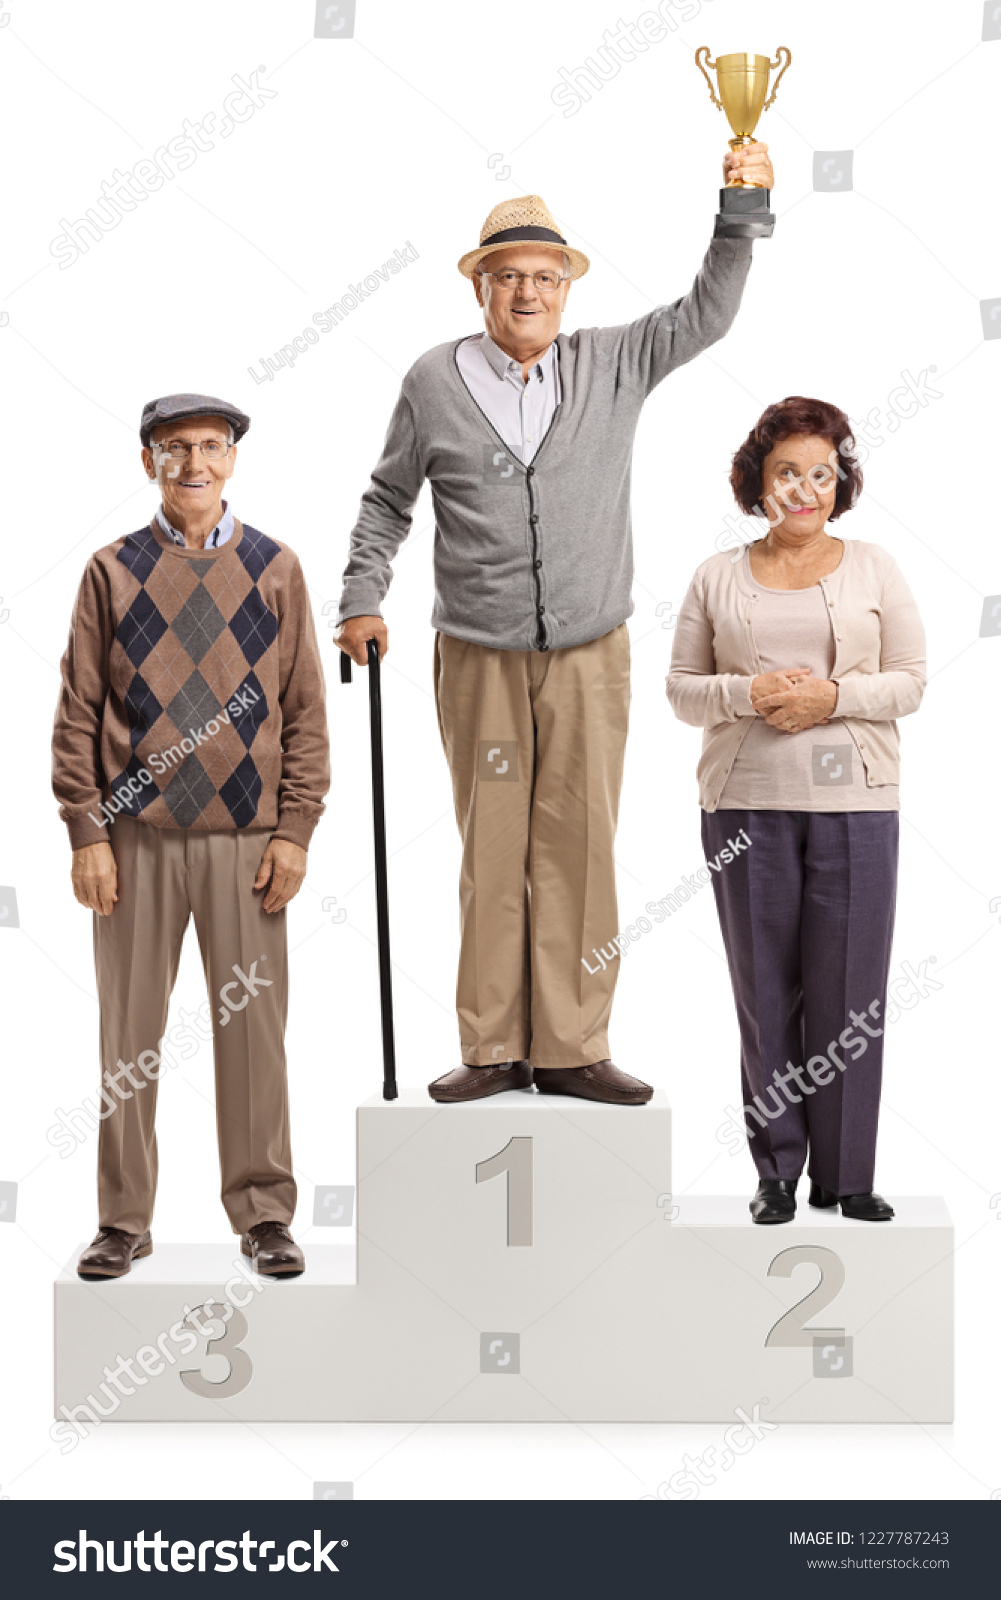 Full length portrait of senior people on a winner's pedestal for first second and third place isolated on white background #1227787243